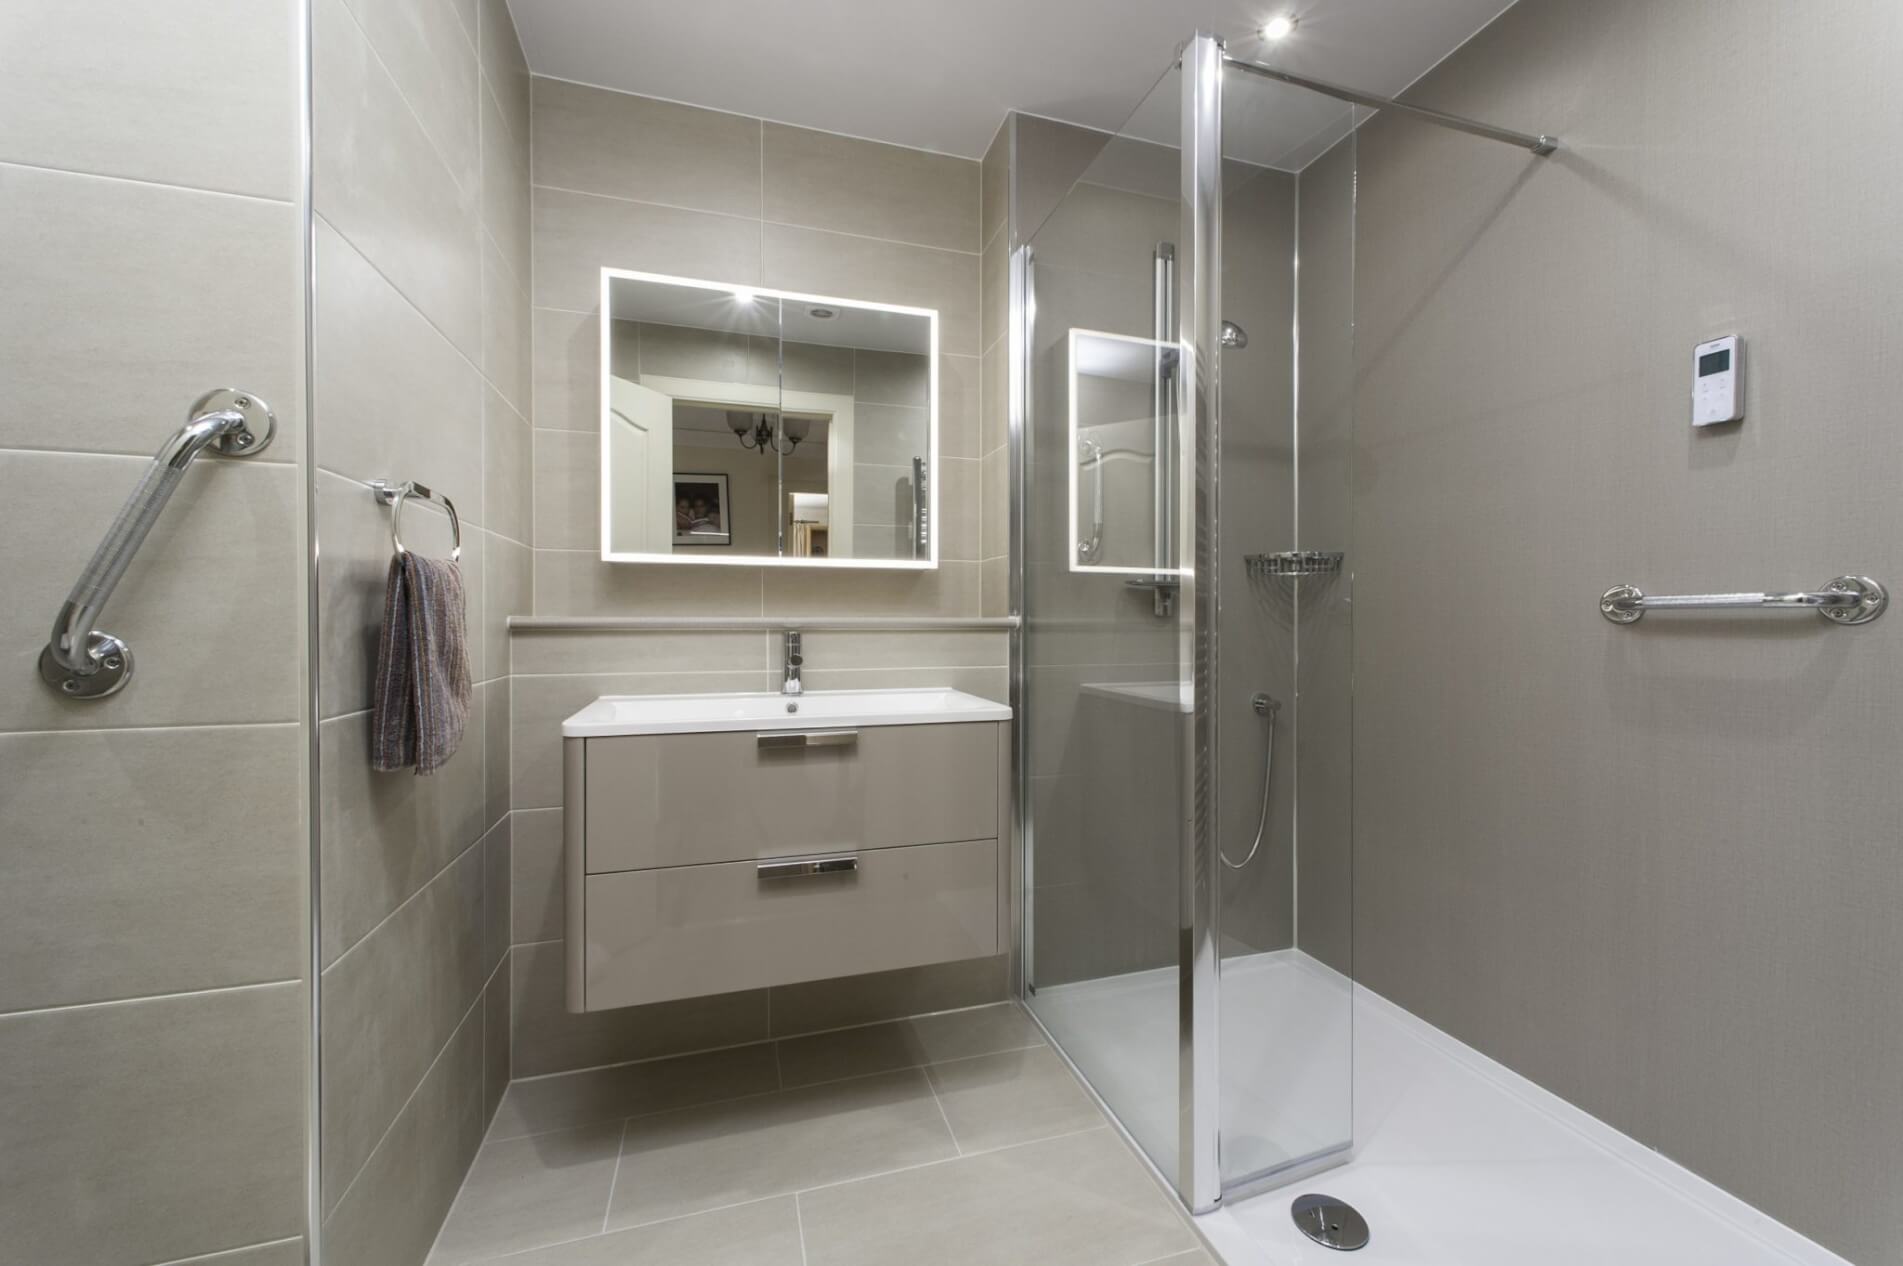 The Importance of grab rails for your bathroom.